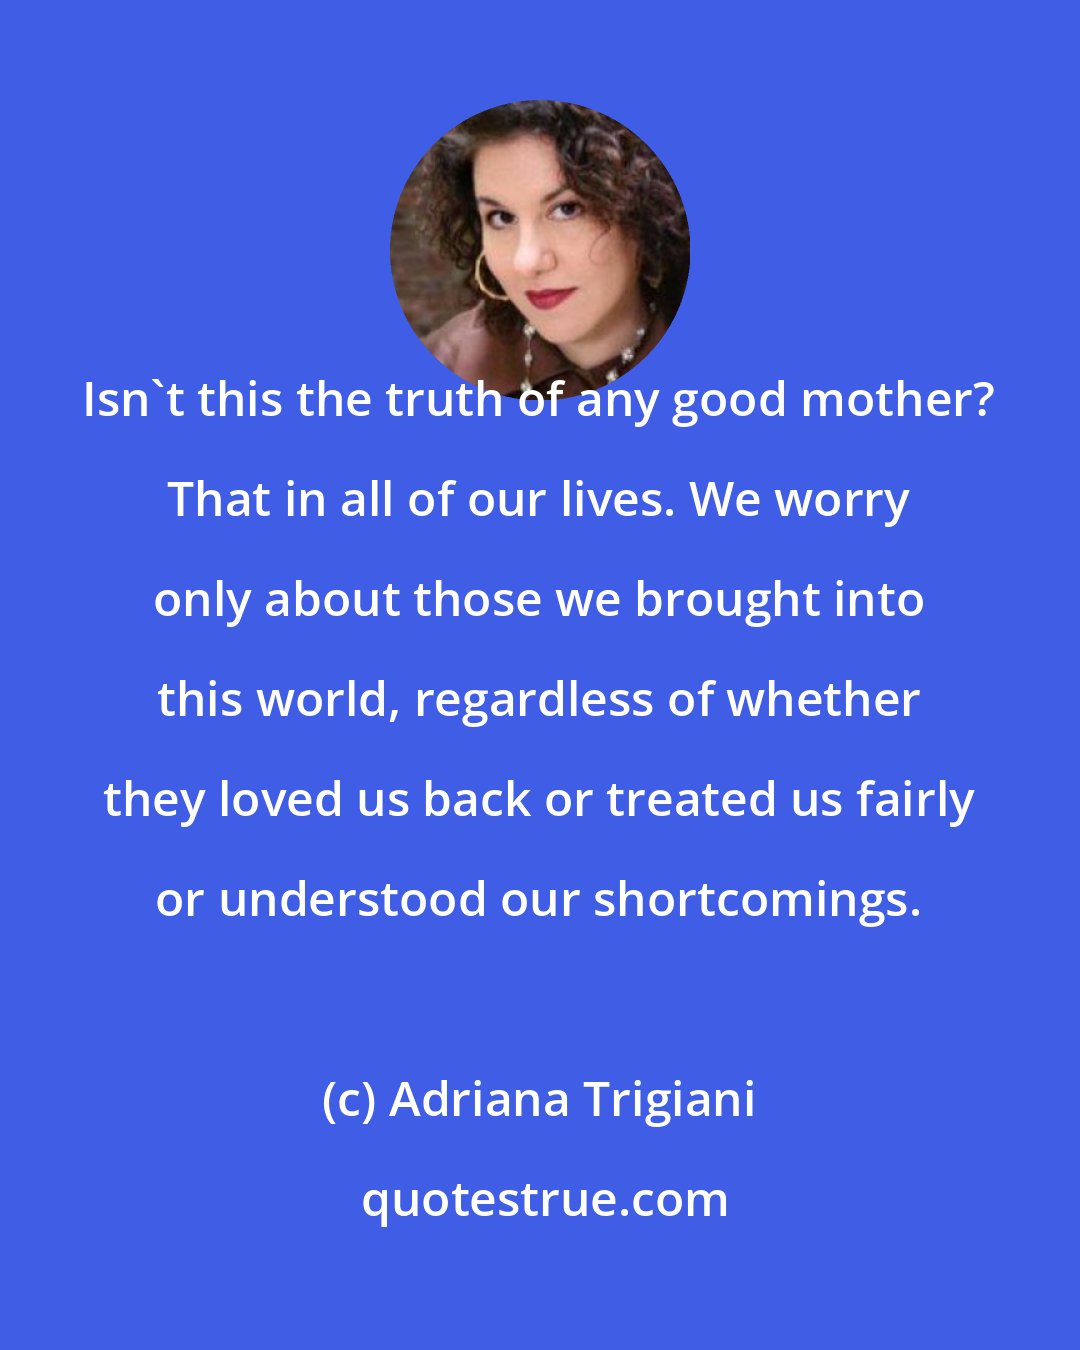 Adriana Trigiani: Isn't this the truth of any good mother? That in all of our lives. We worry only about those we brought into this world, regardless of whether they loved us back or treated us fairly or understood our shortcomings.